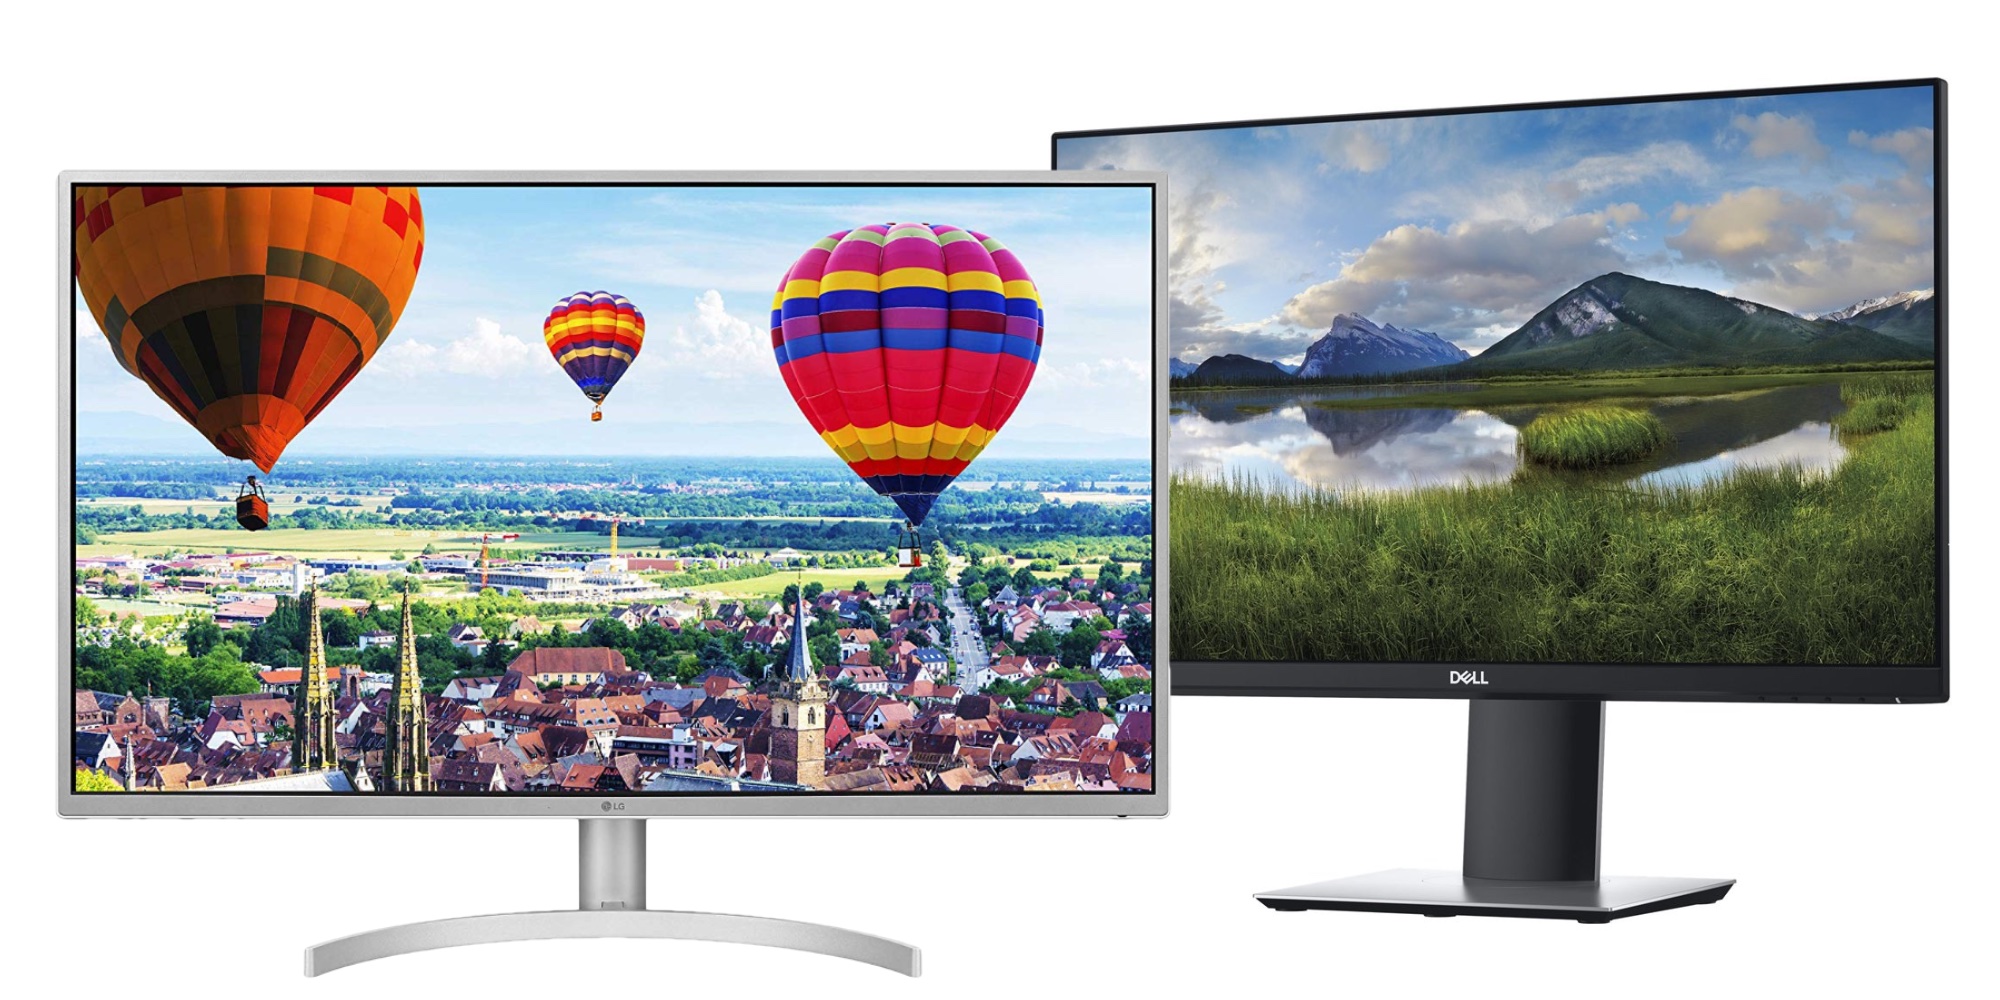 Dell's 23-inch Monitor packs a USB 3.0 hub at $180 shipped (Amazon low